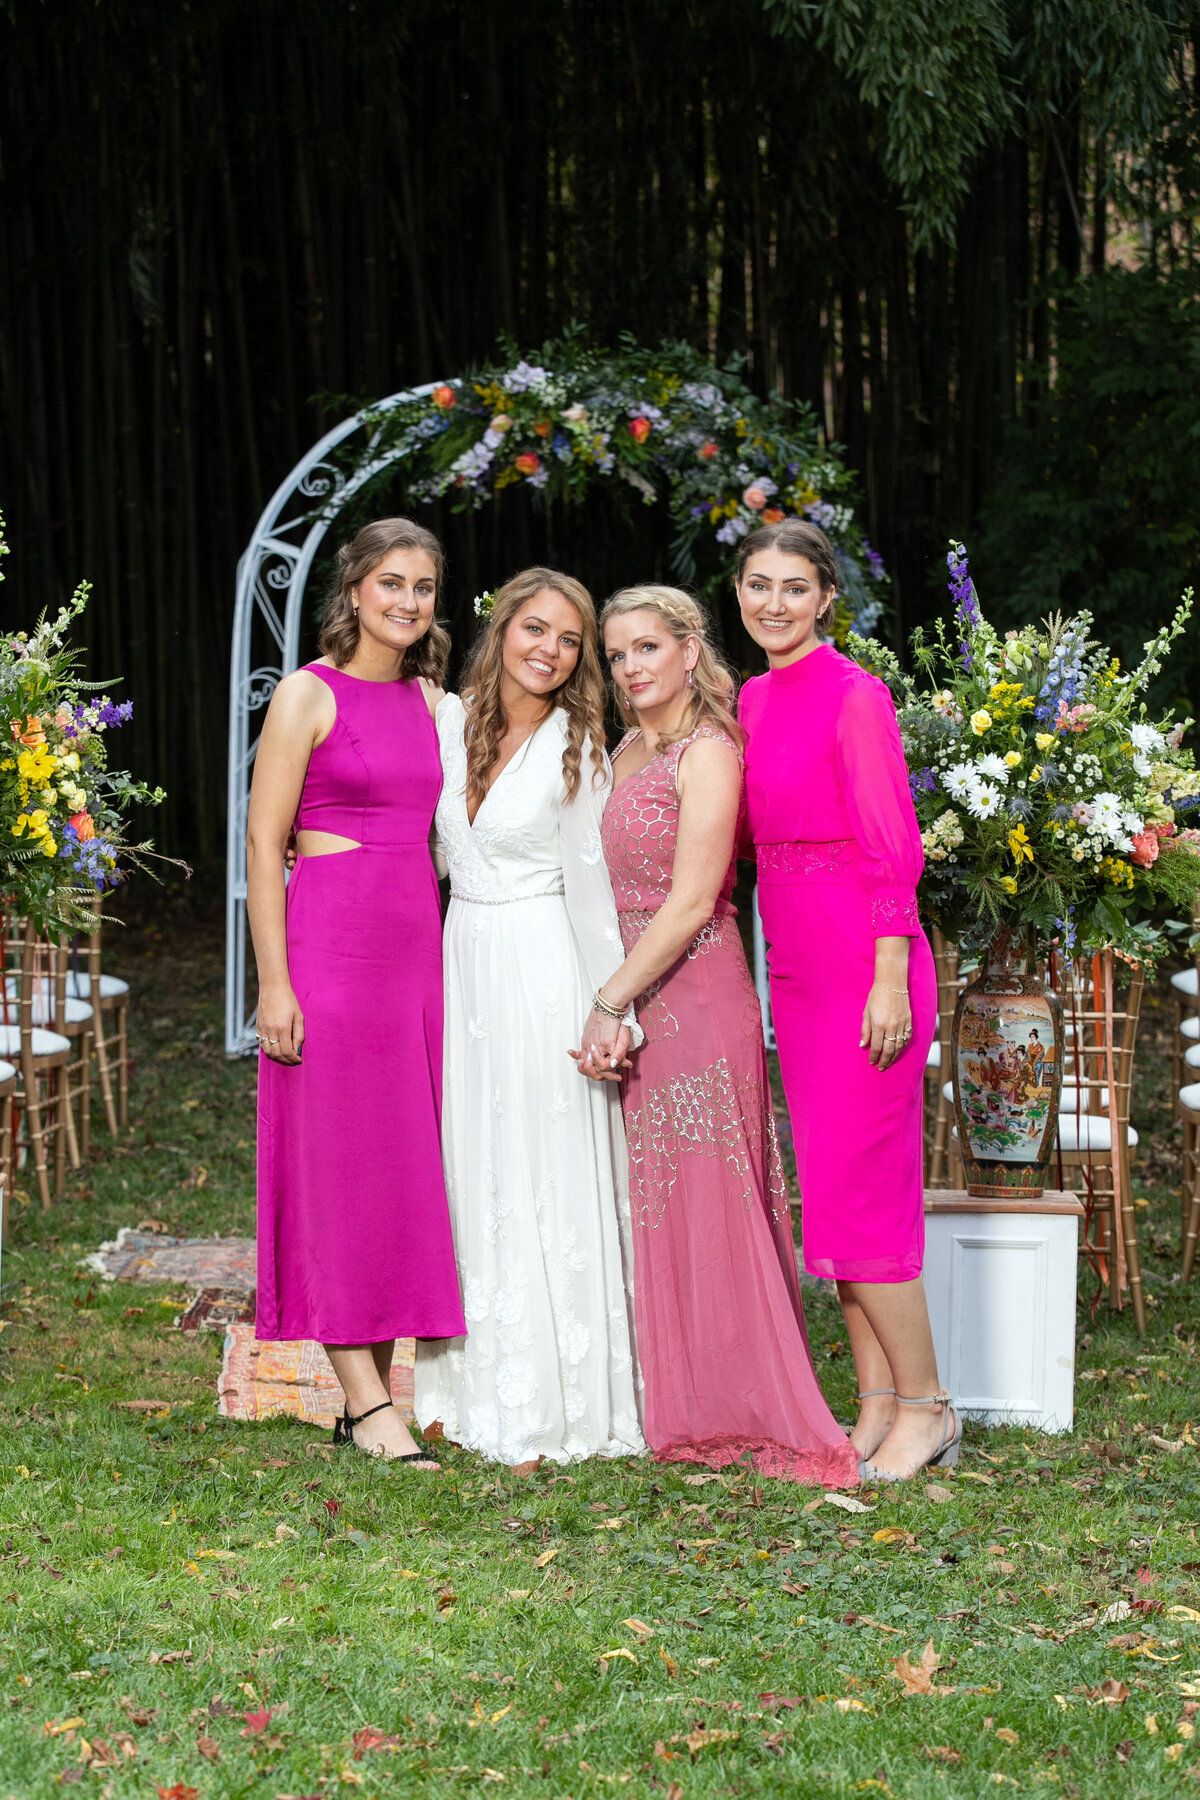 Three bridesmaids wearing pink stand under a floral arch with the bride